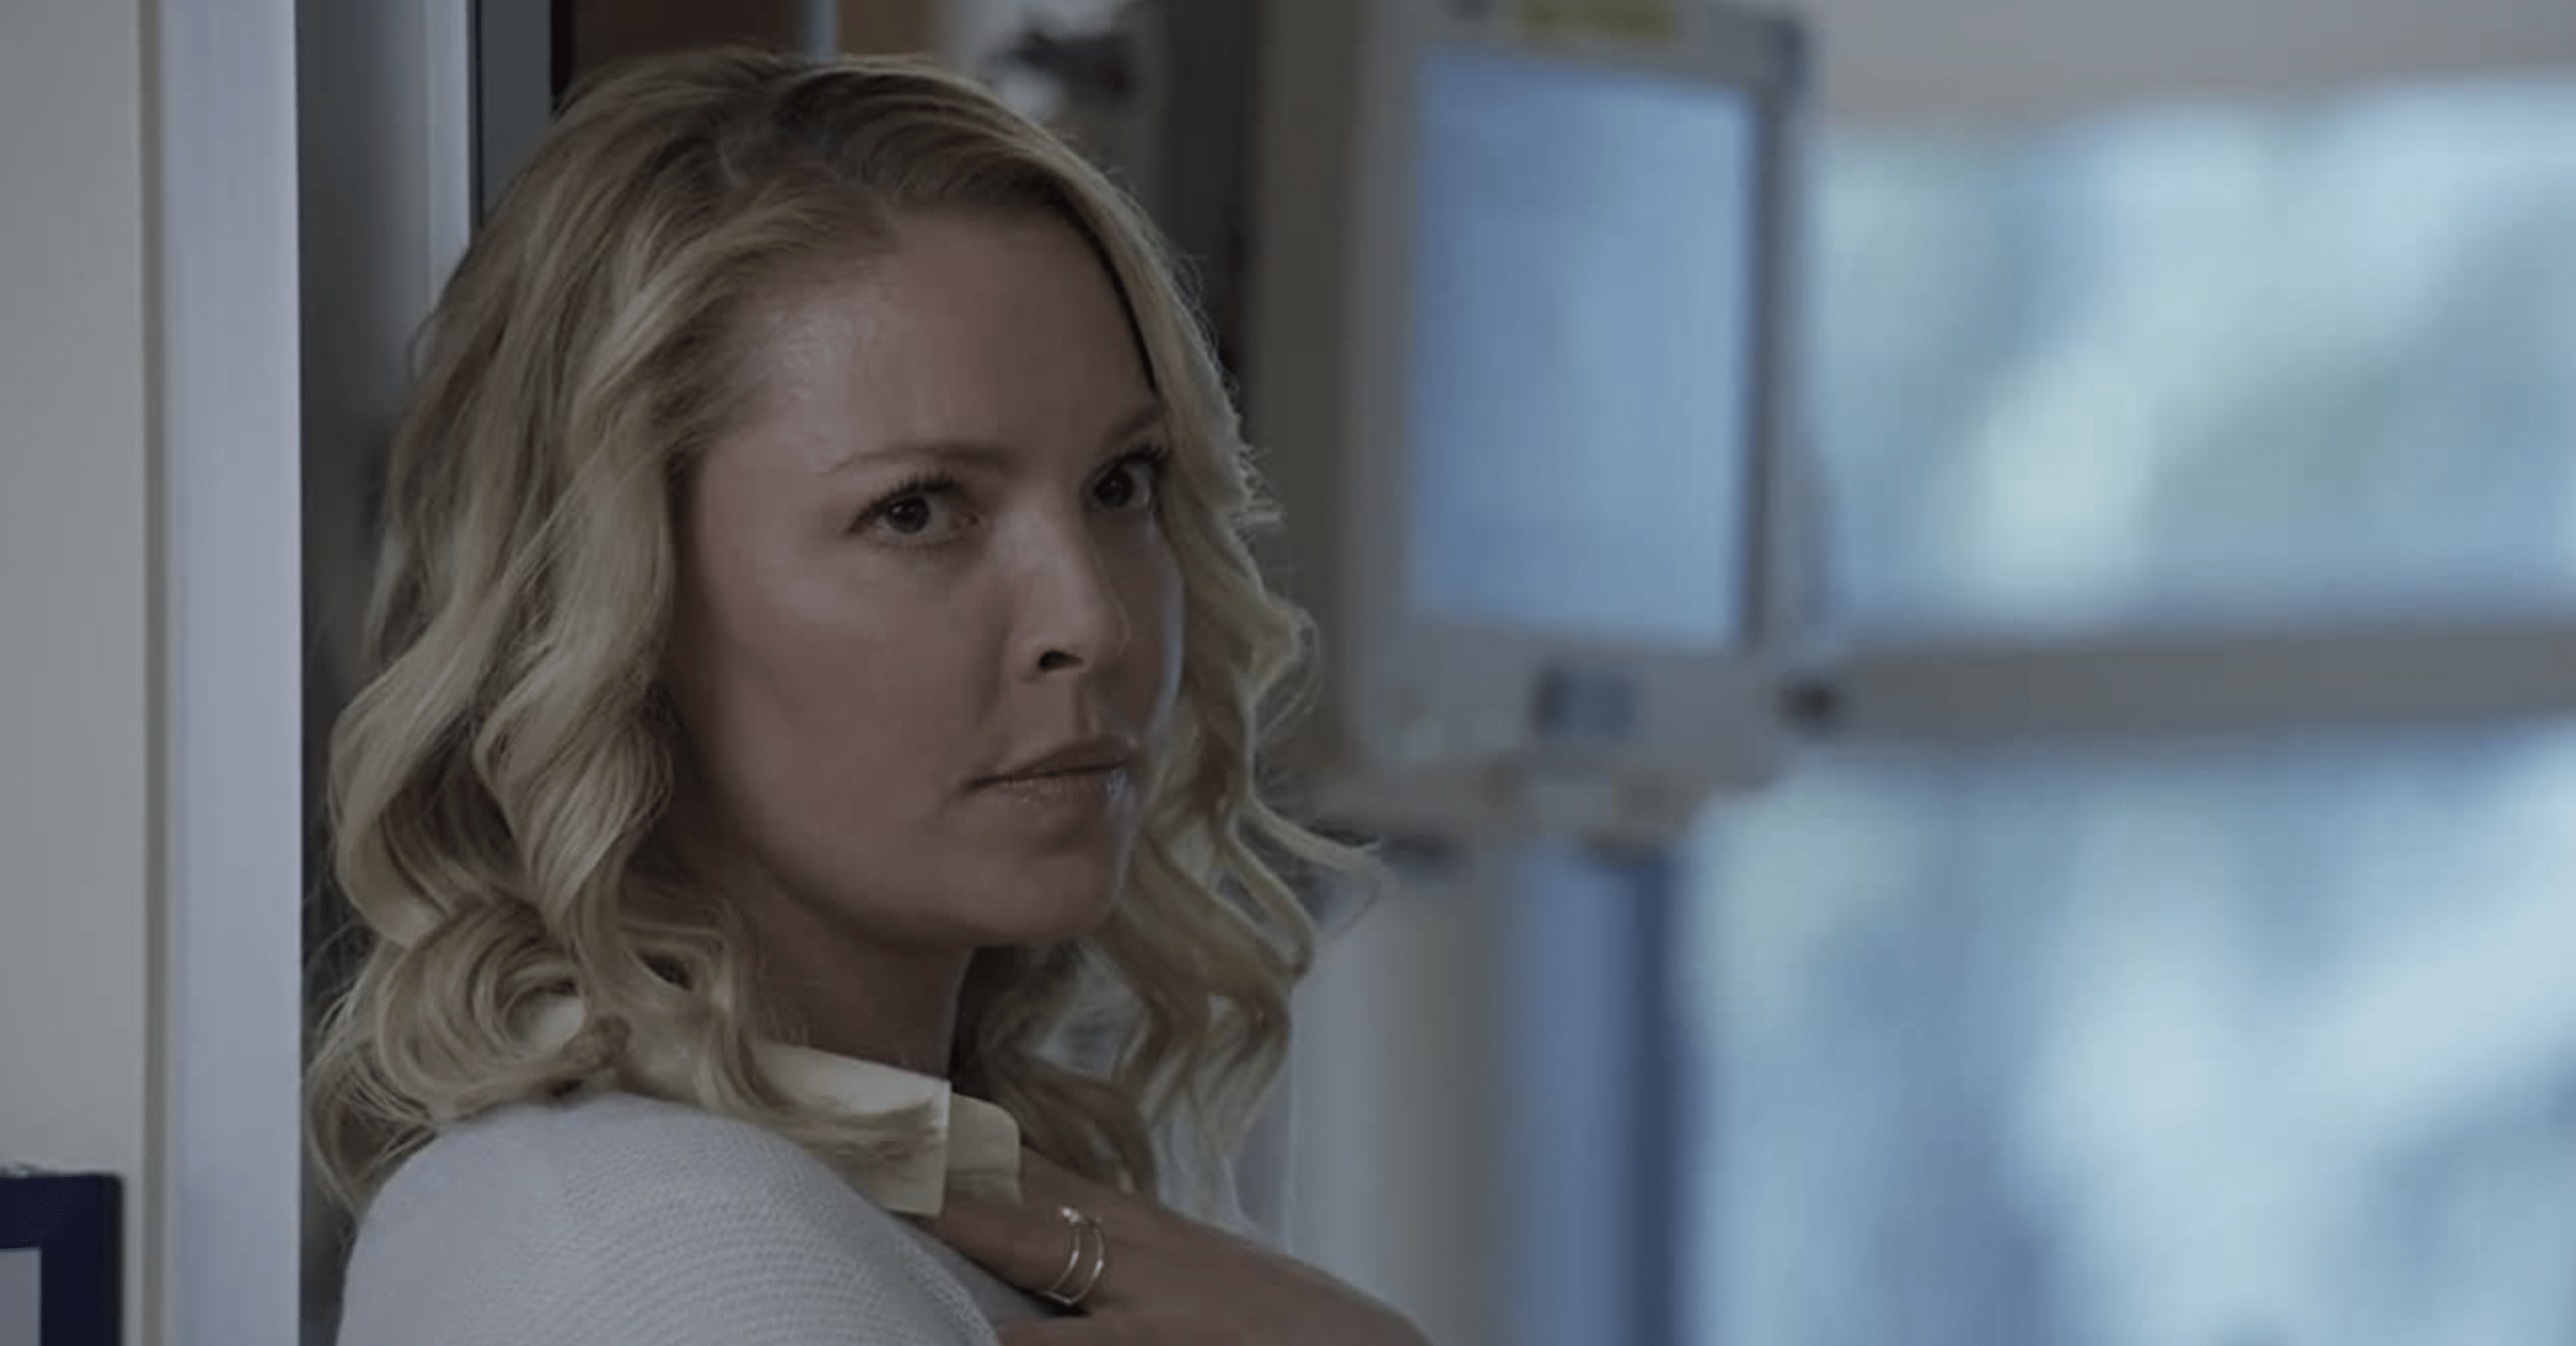 Katherine Heigl in Fear Of Rain leaning against a door frame